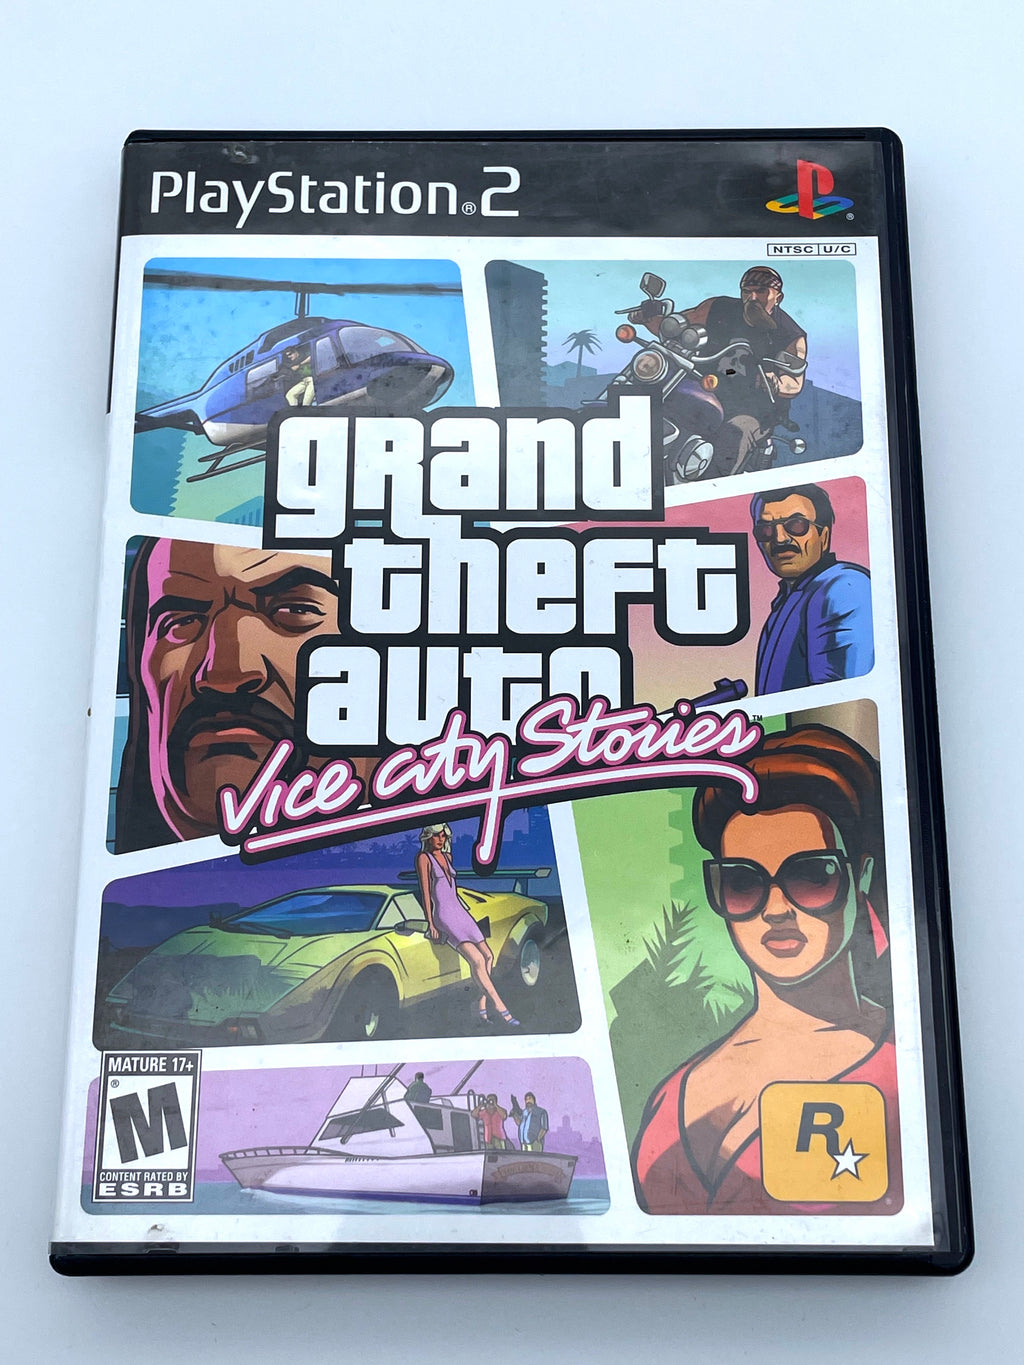 Grand Theft Auto: Vice City Stories (PS2) : Video Games 